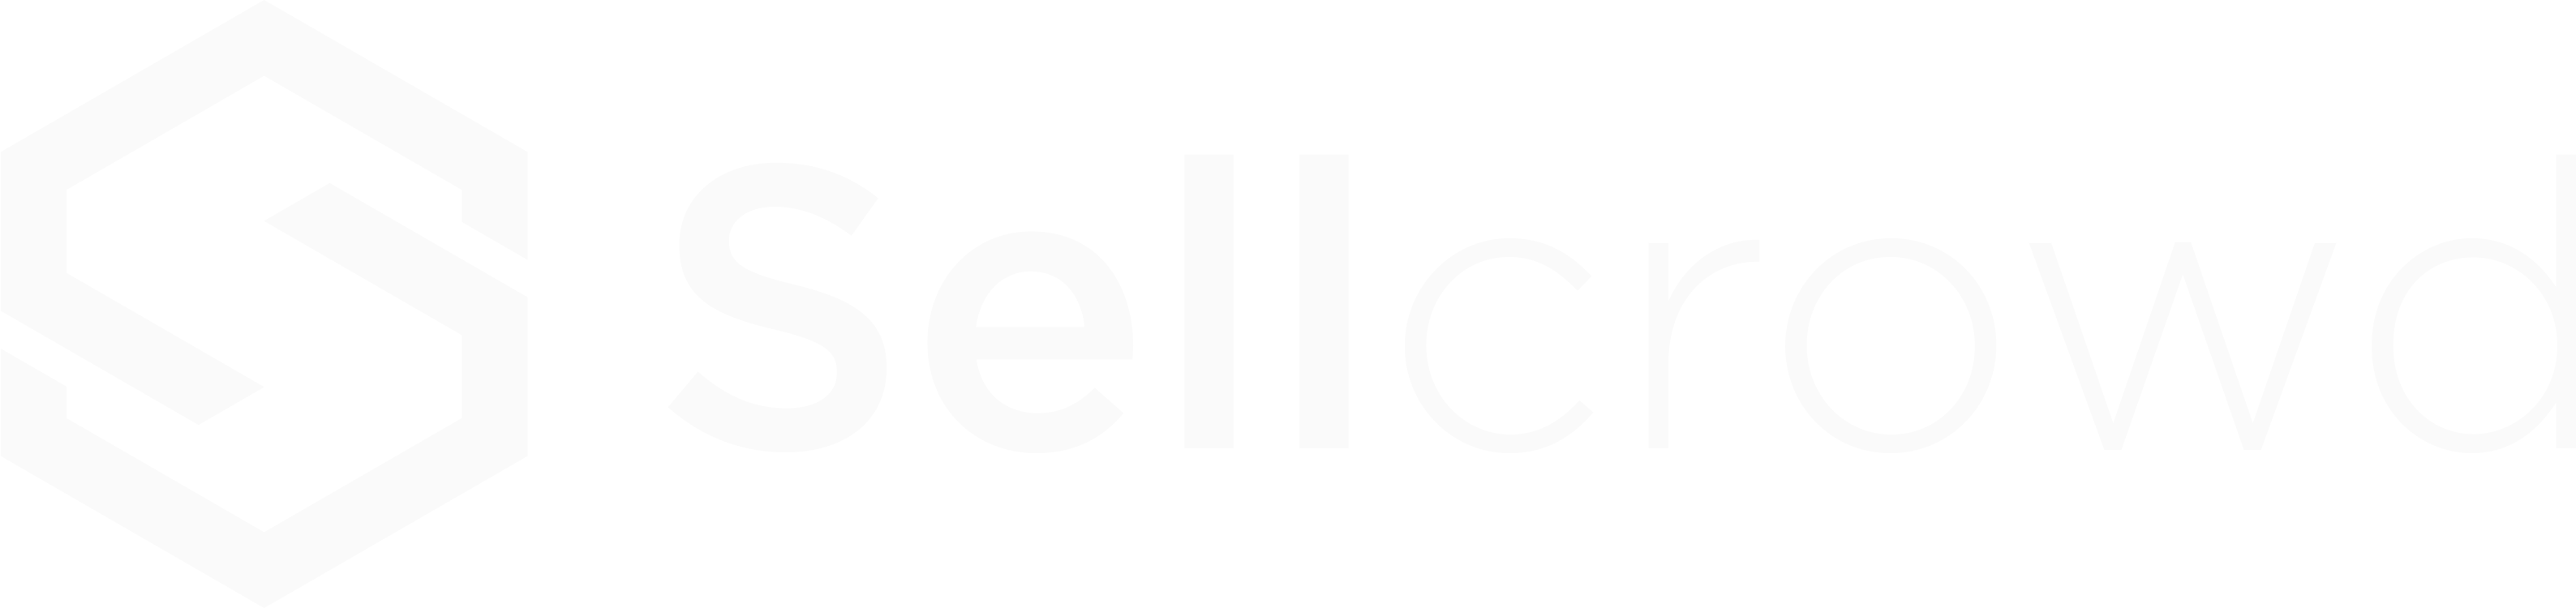 How to Log Activity in Sellcrowd?